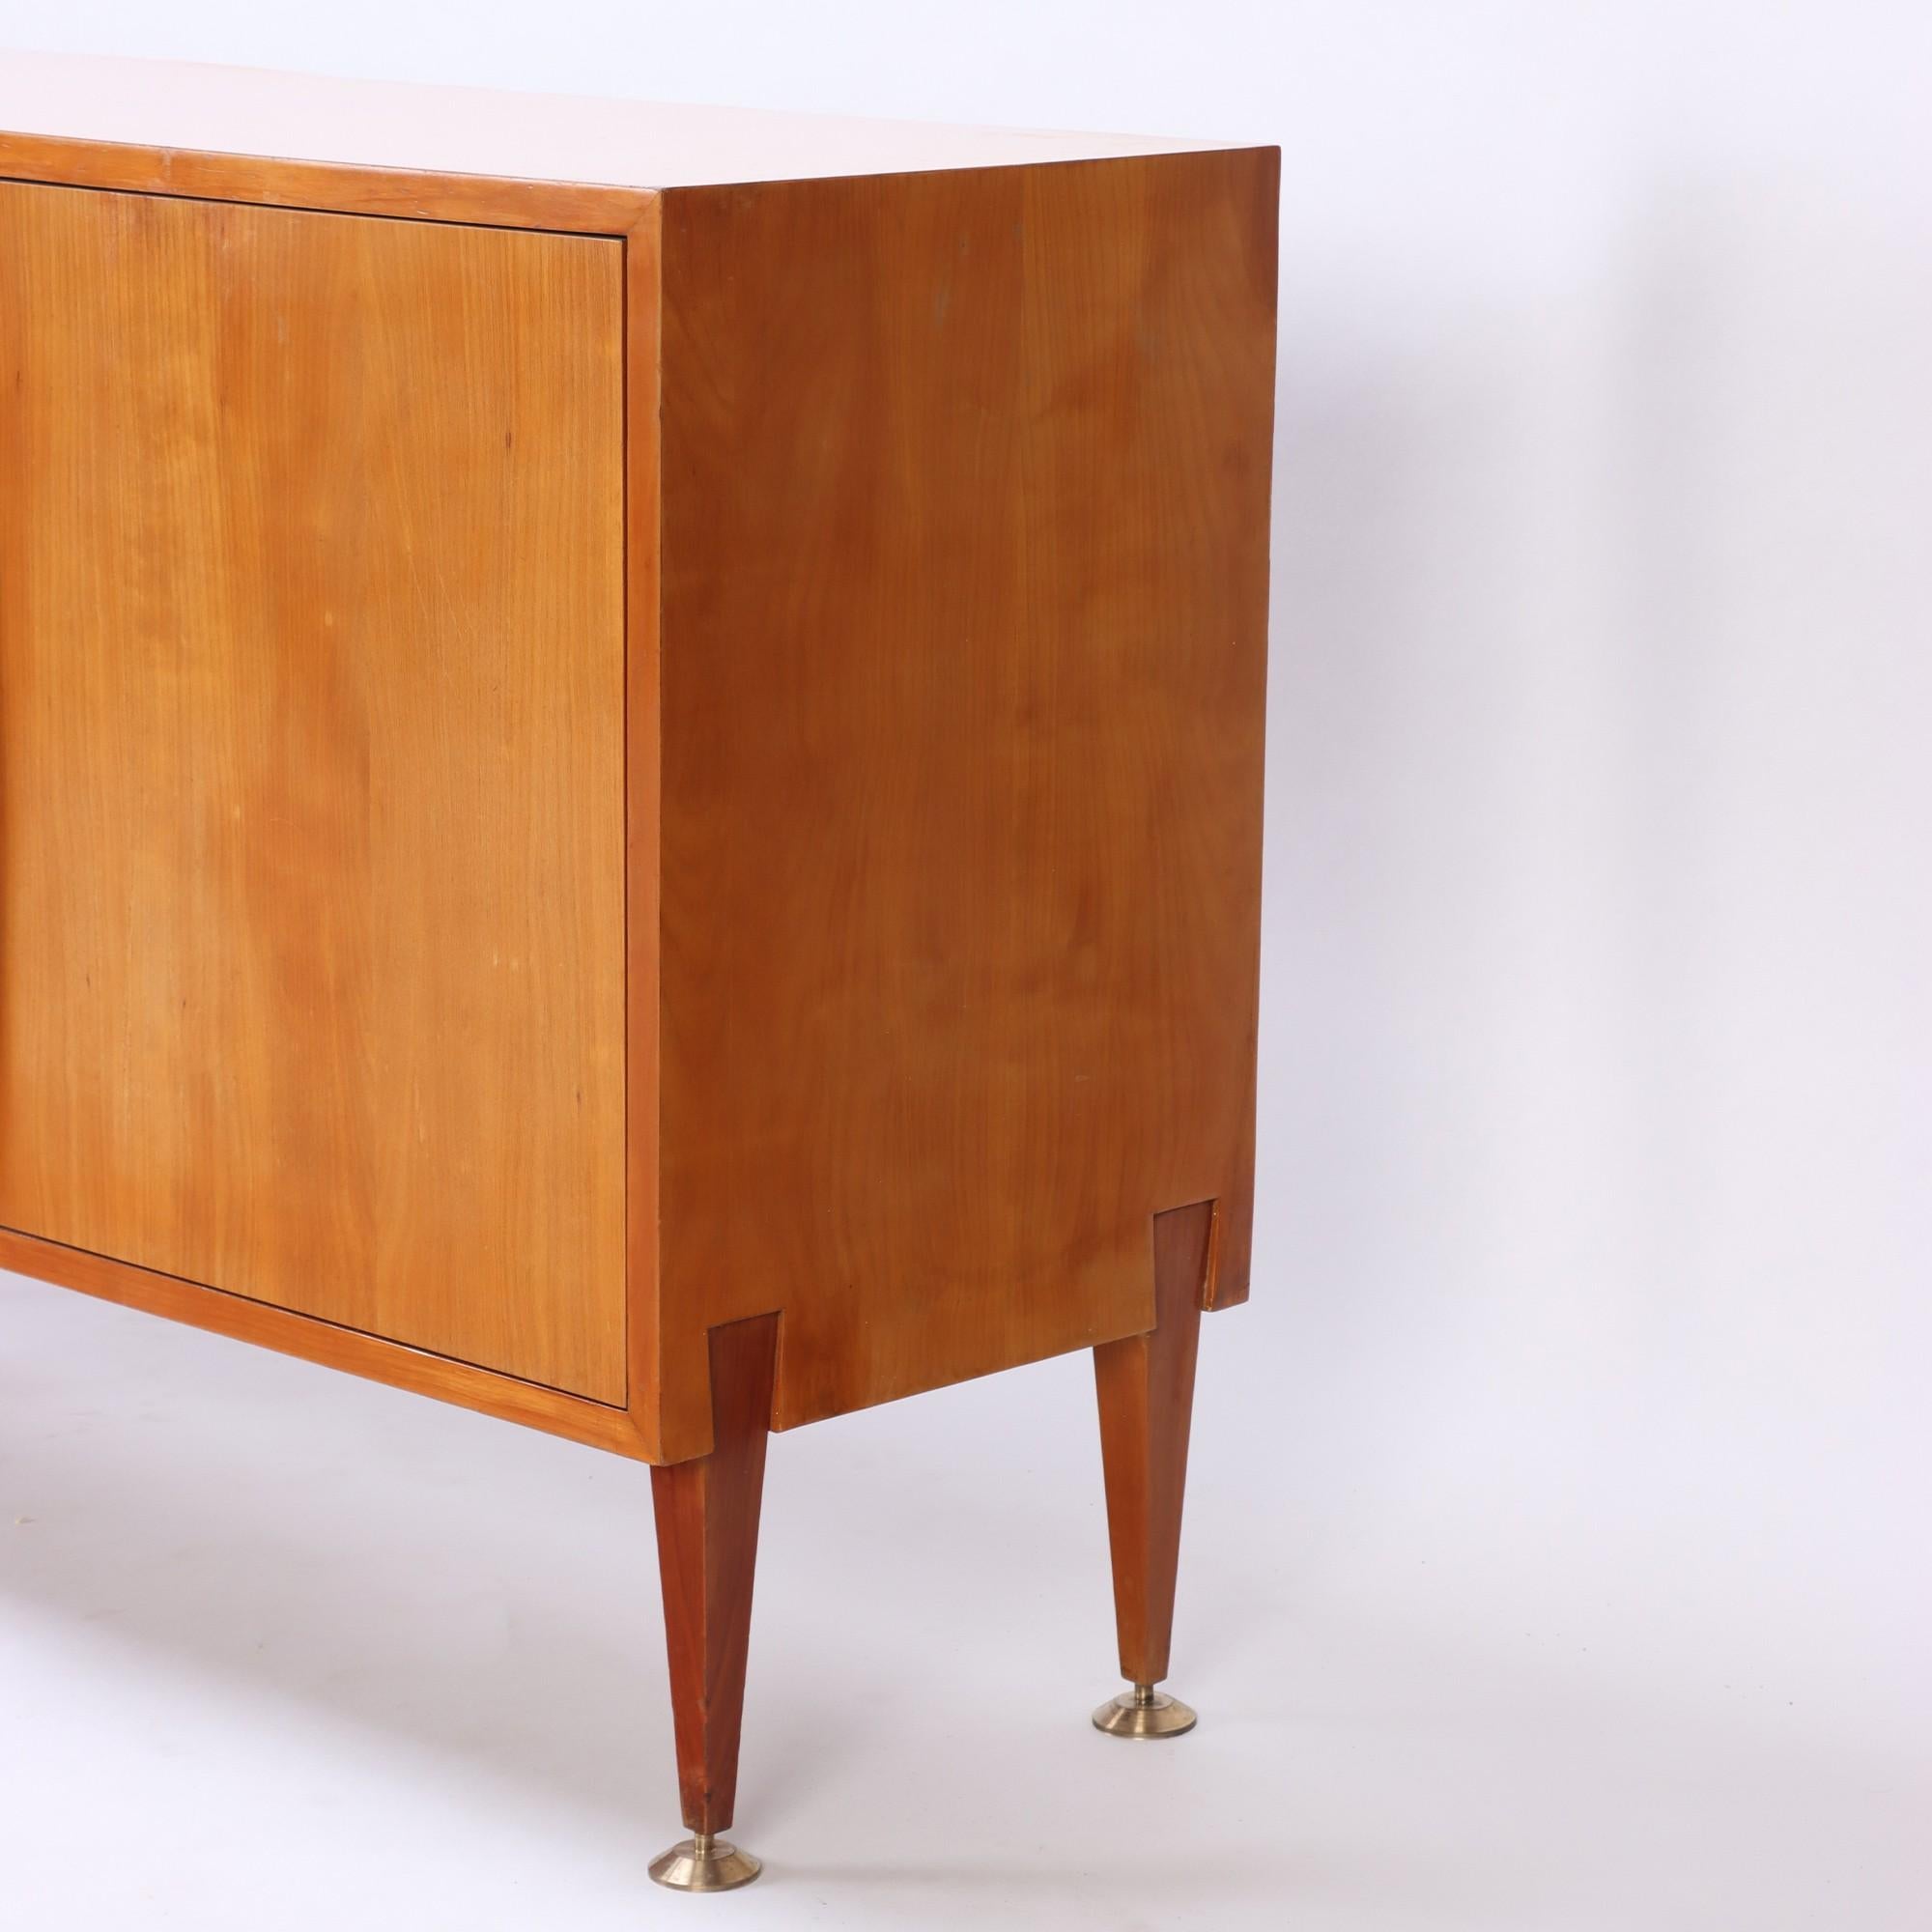 Italian Mid-Century Modern Two Tone Sideboard, circa 1960 In Good Condition For Sale In Philadelphia, PA